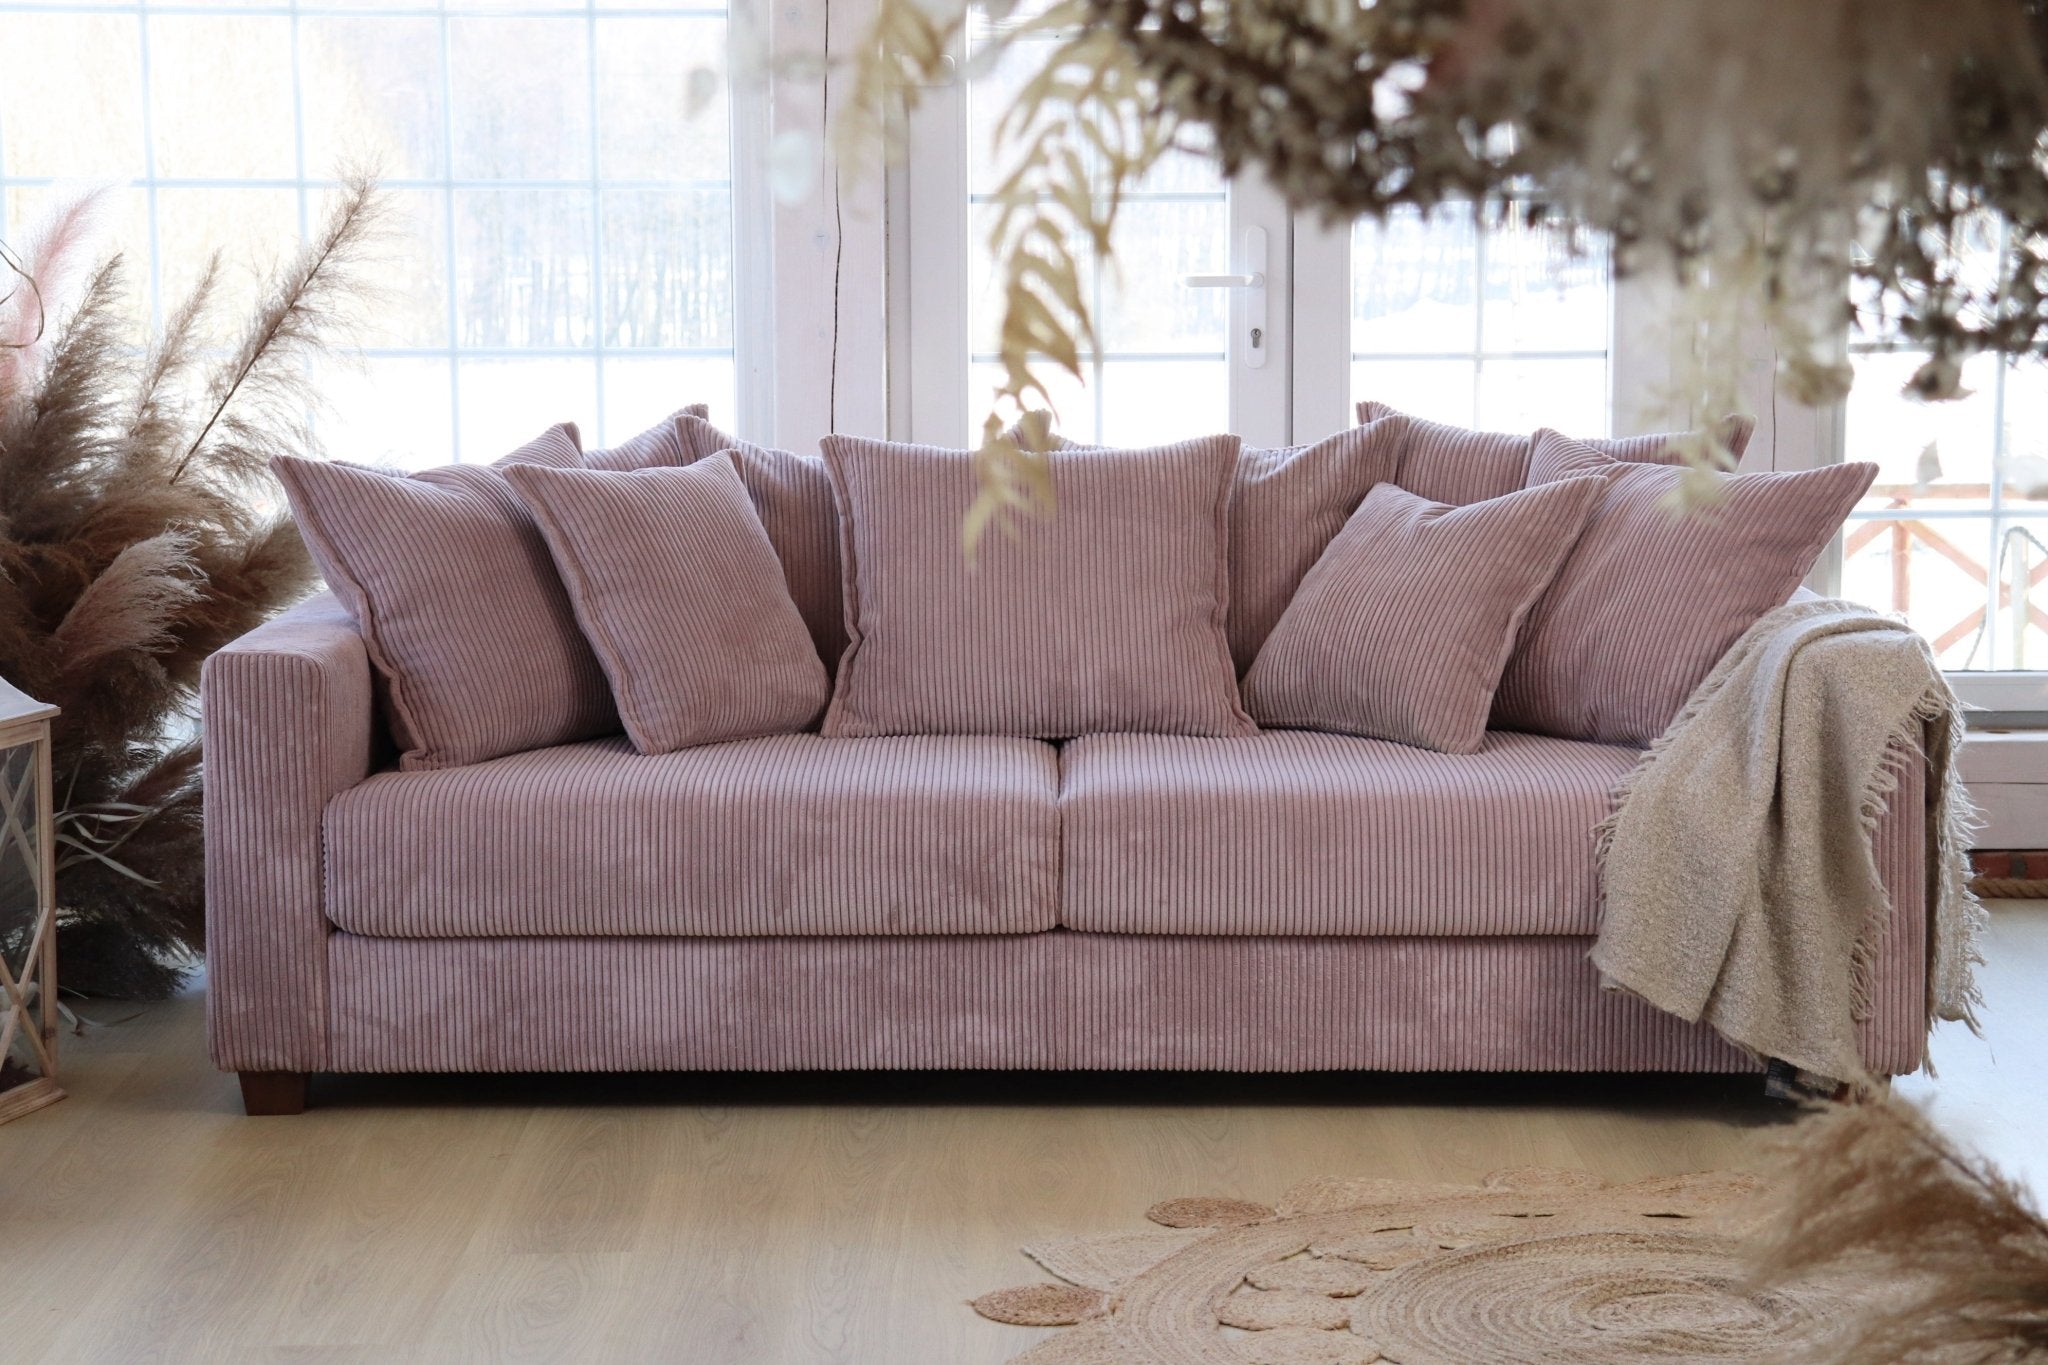 ELSA 3-seater Sofa, Dusty Pink Corduroy, removable & washable covers - Scandinavian Stories by Marton